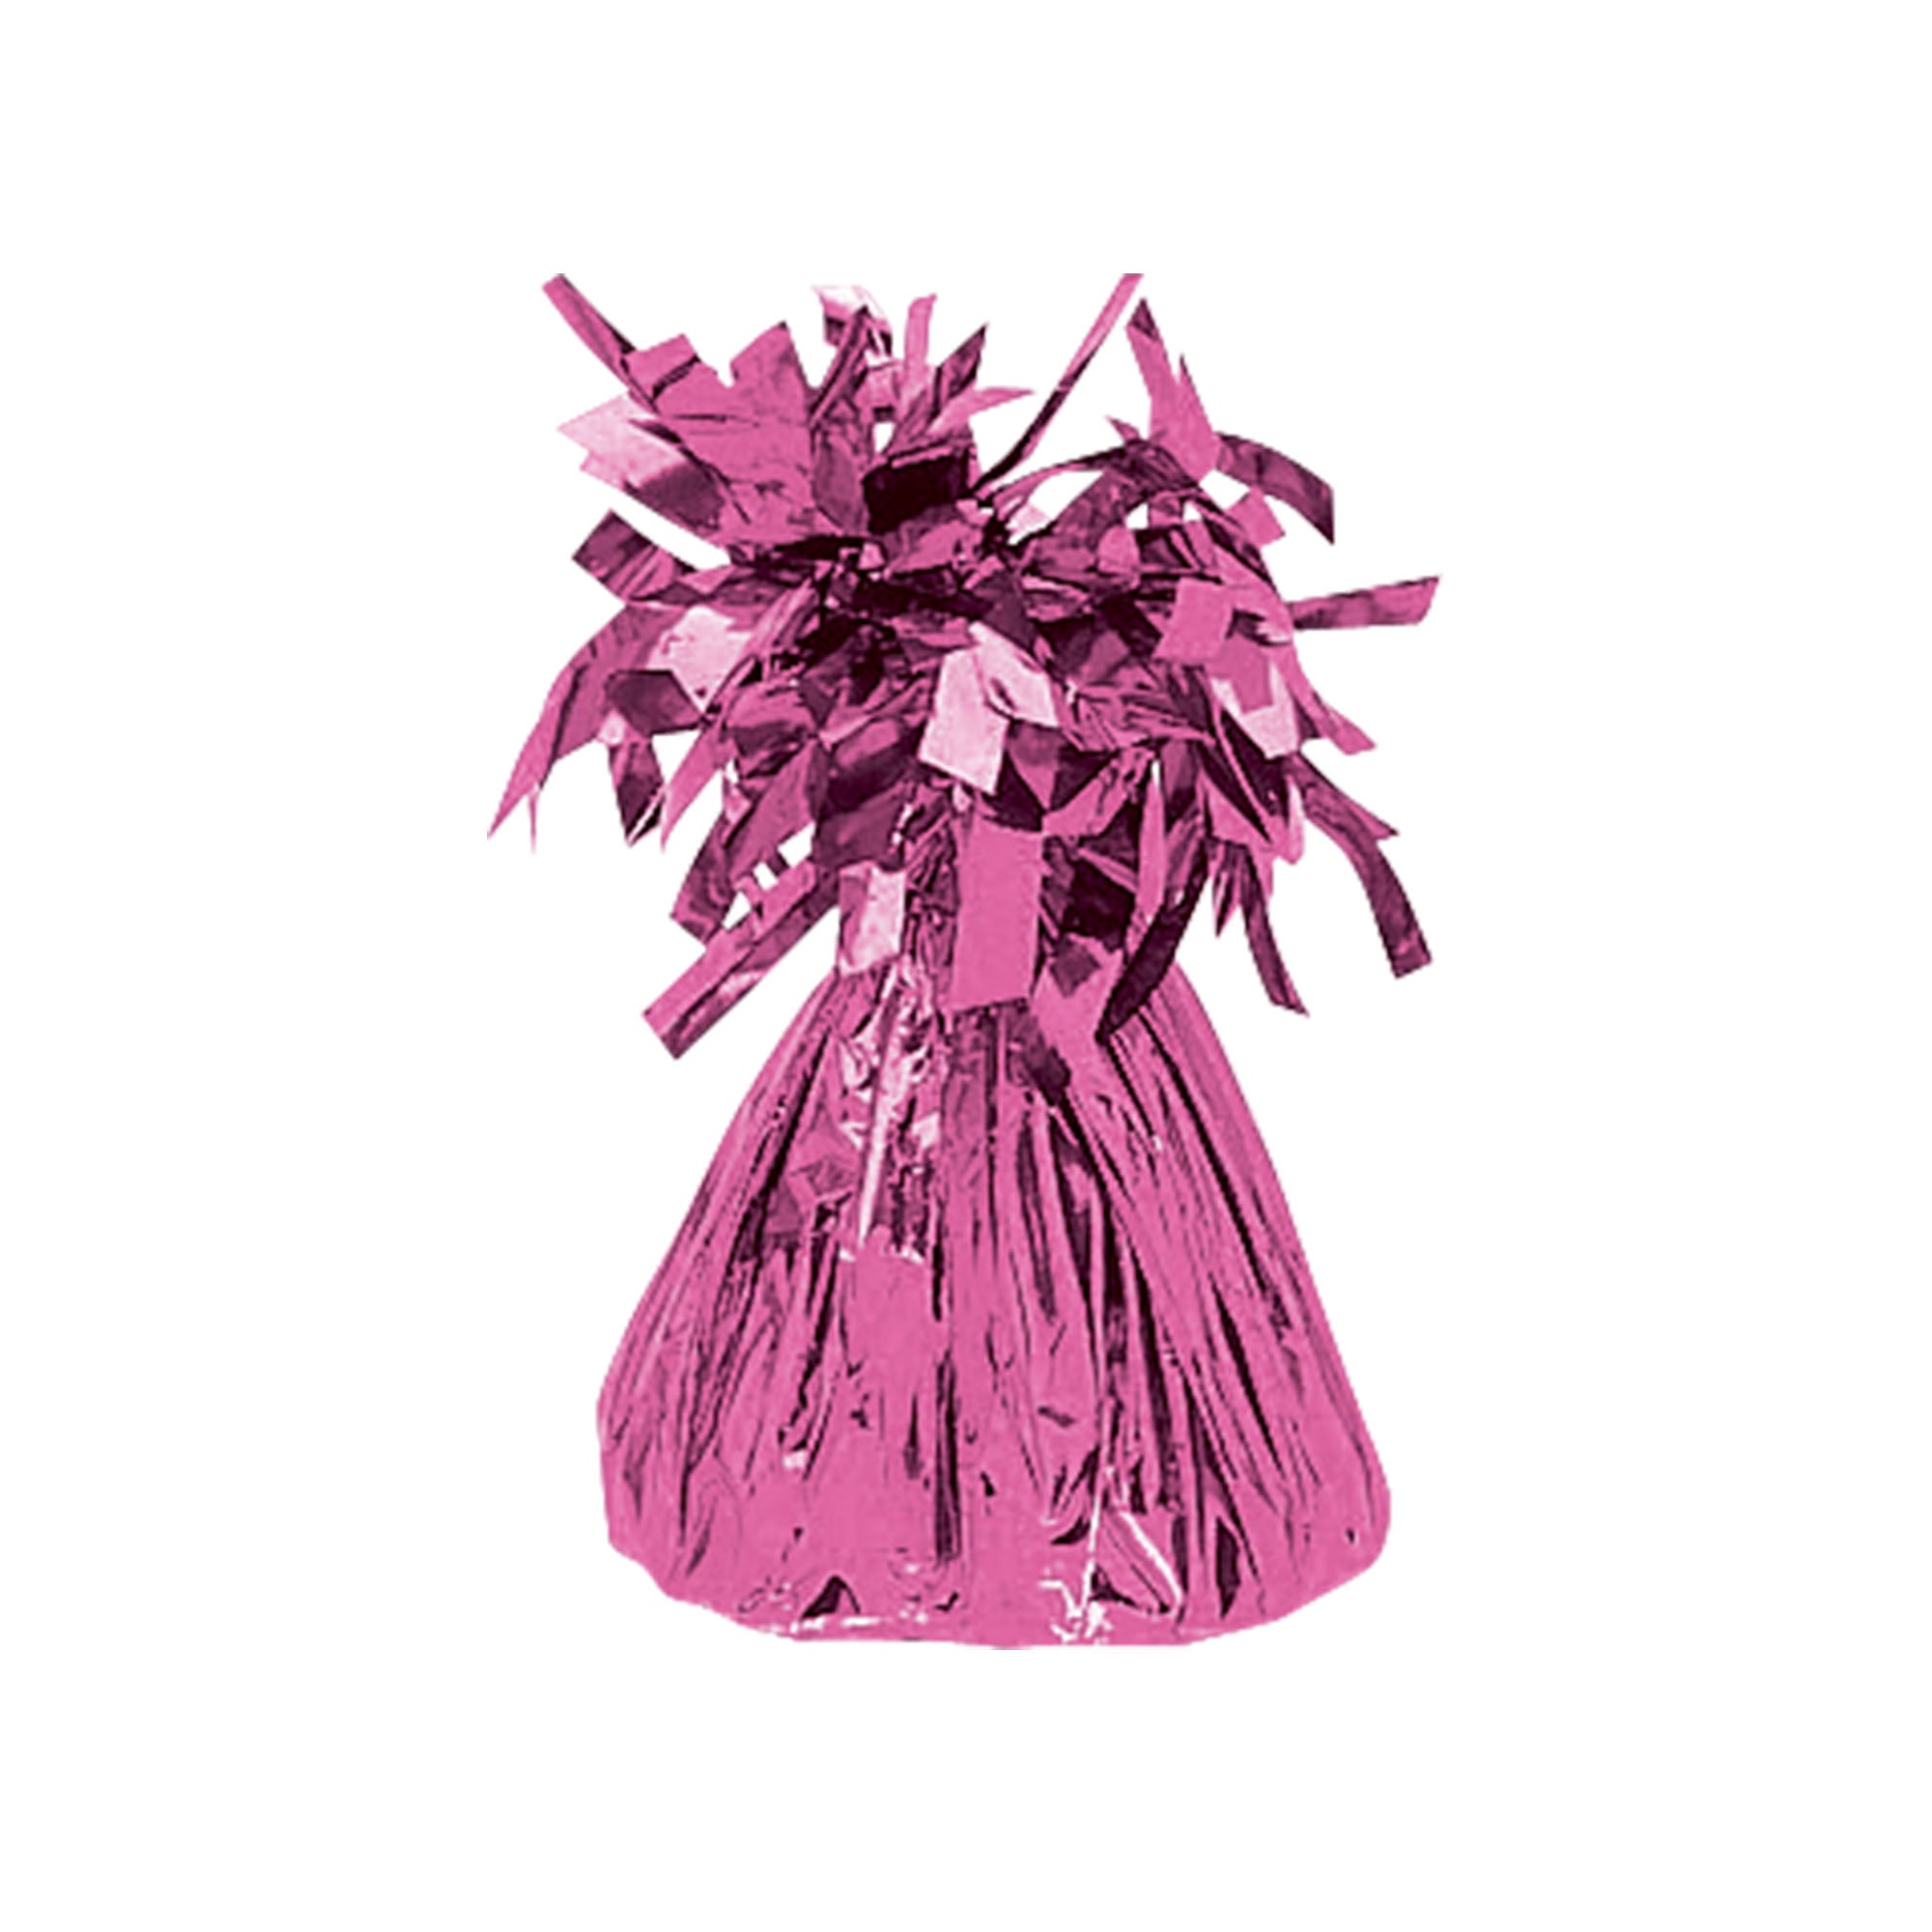 Small Foil Balloon Weight  Bright Pink